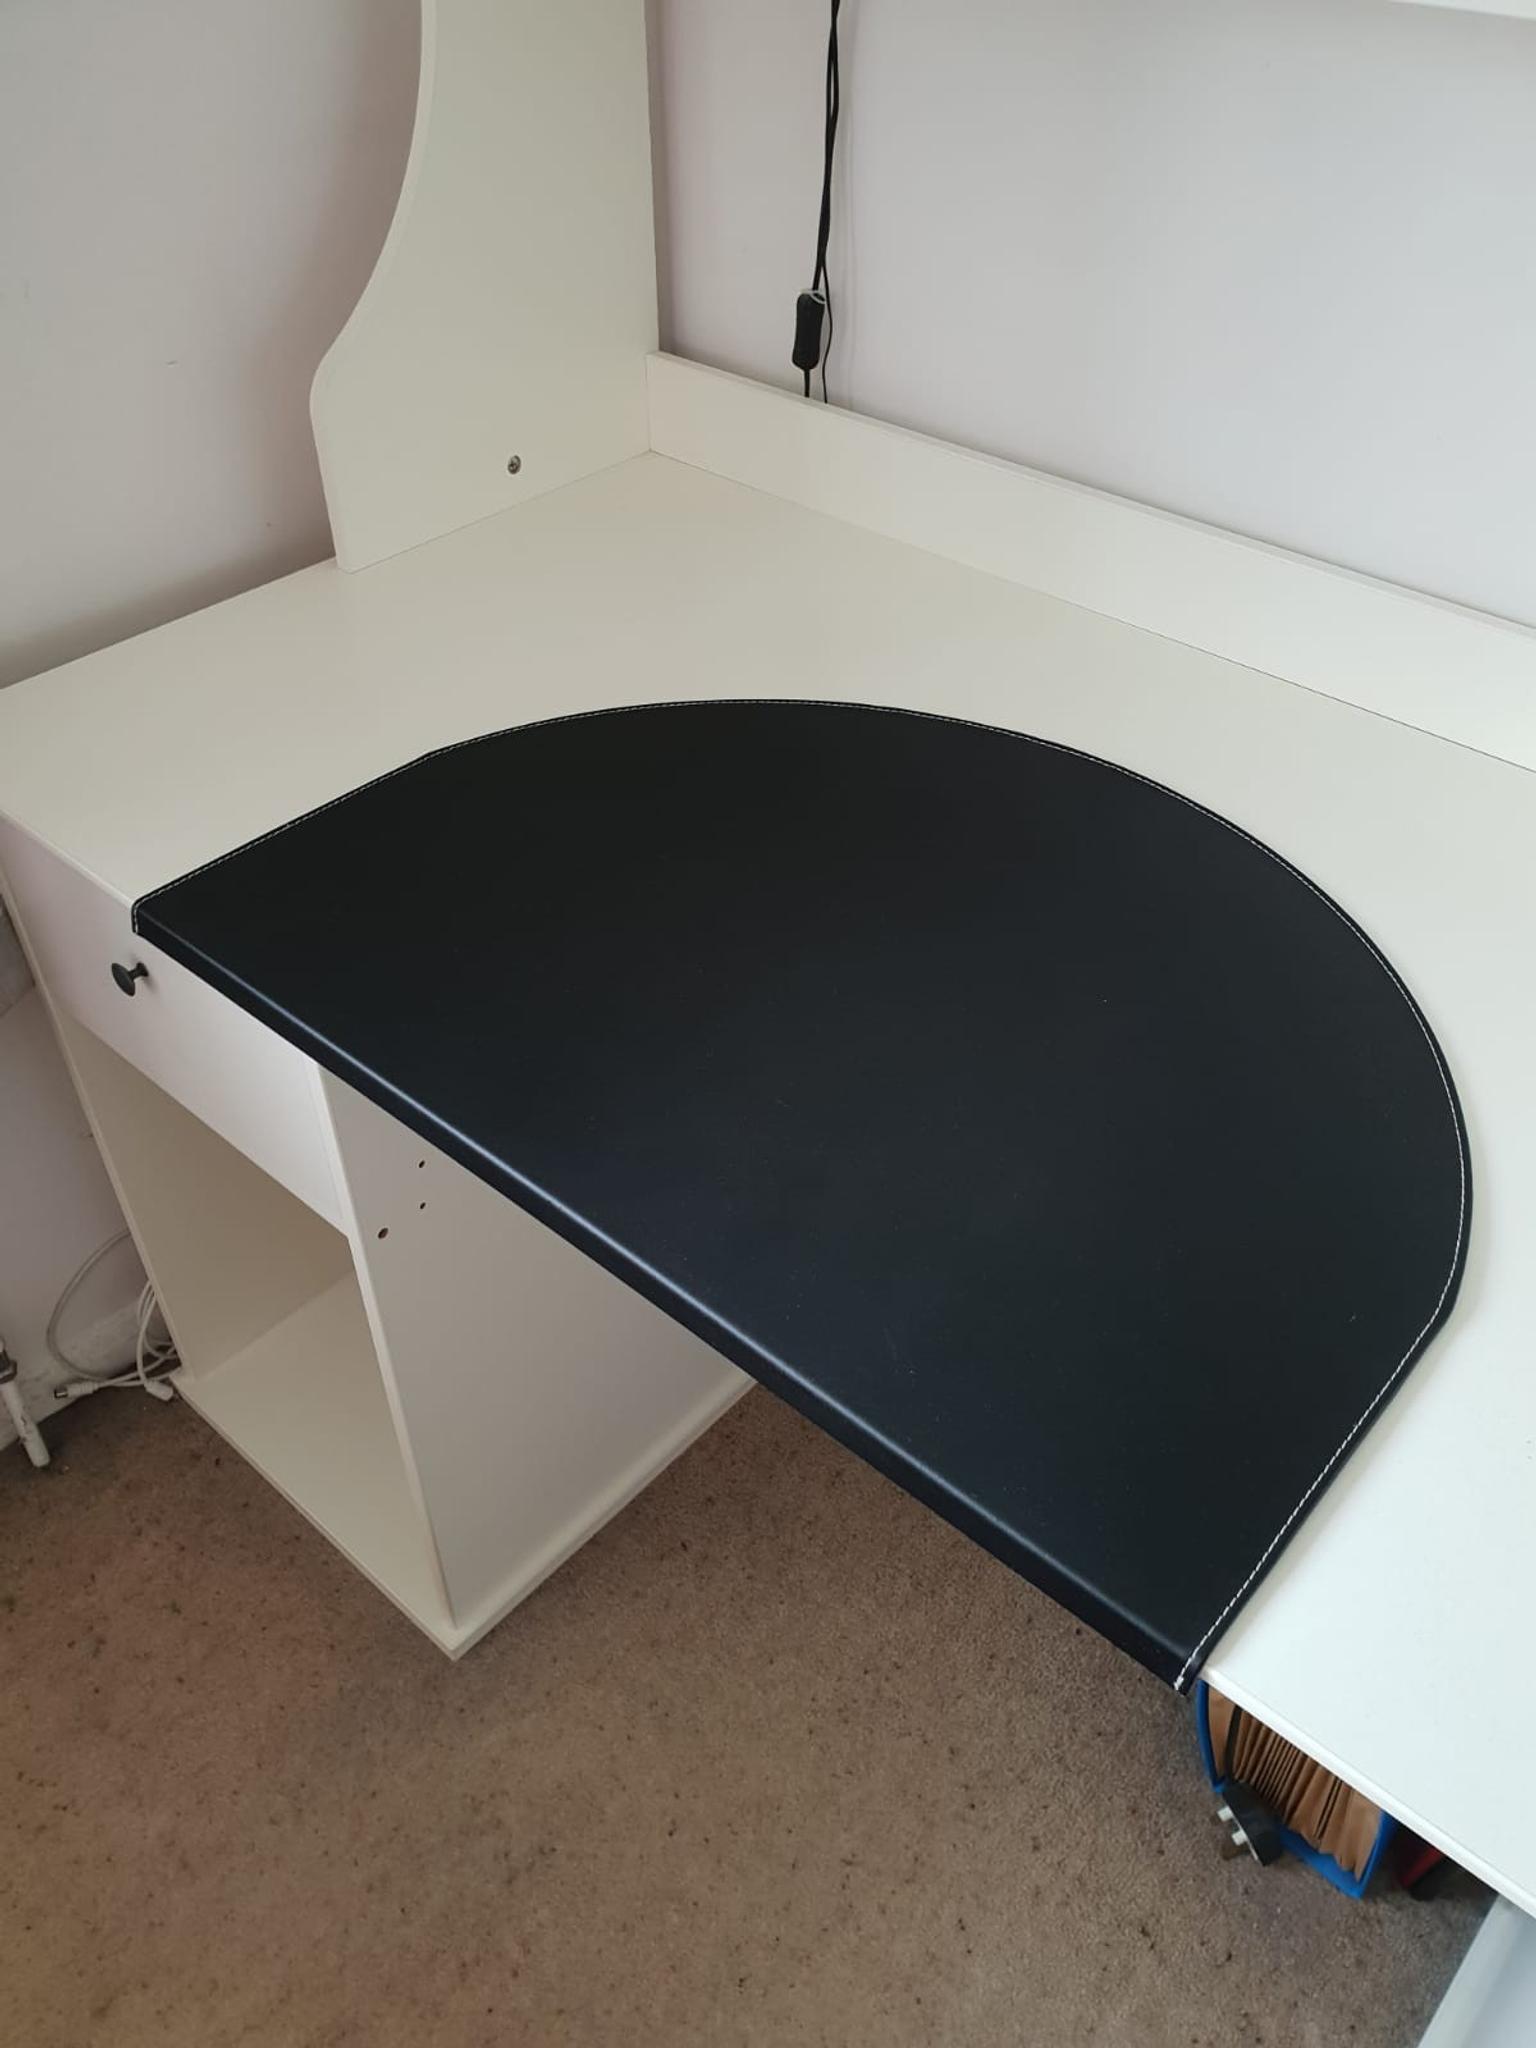 Ikea Large White Desk In Tn16 London Borough Of Bromley For 30 00